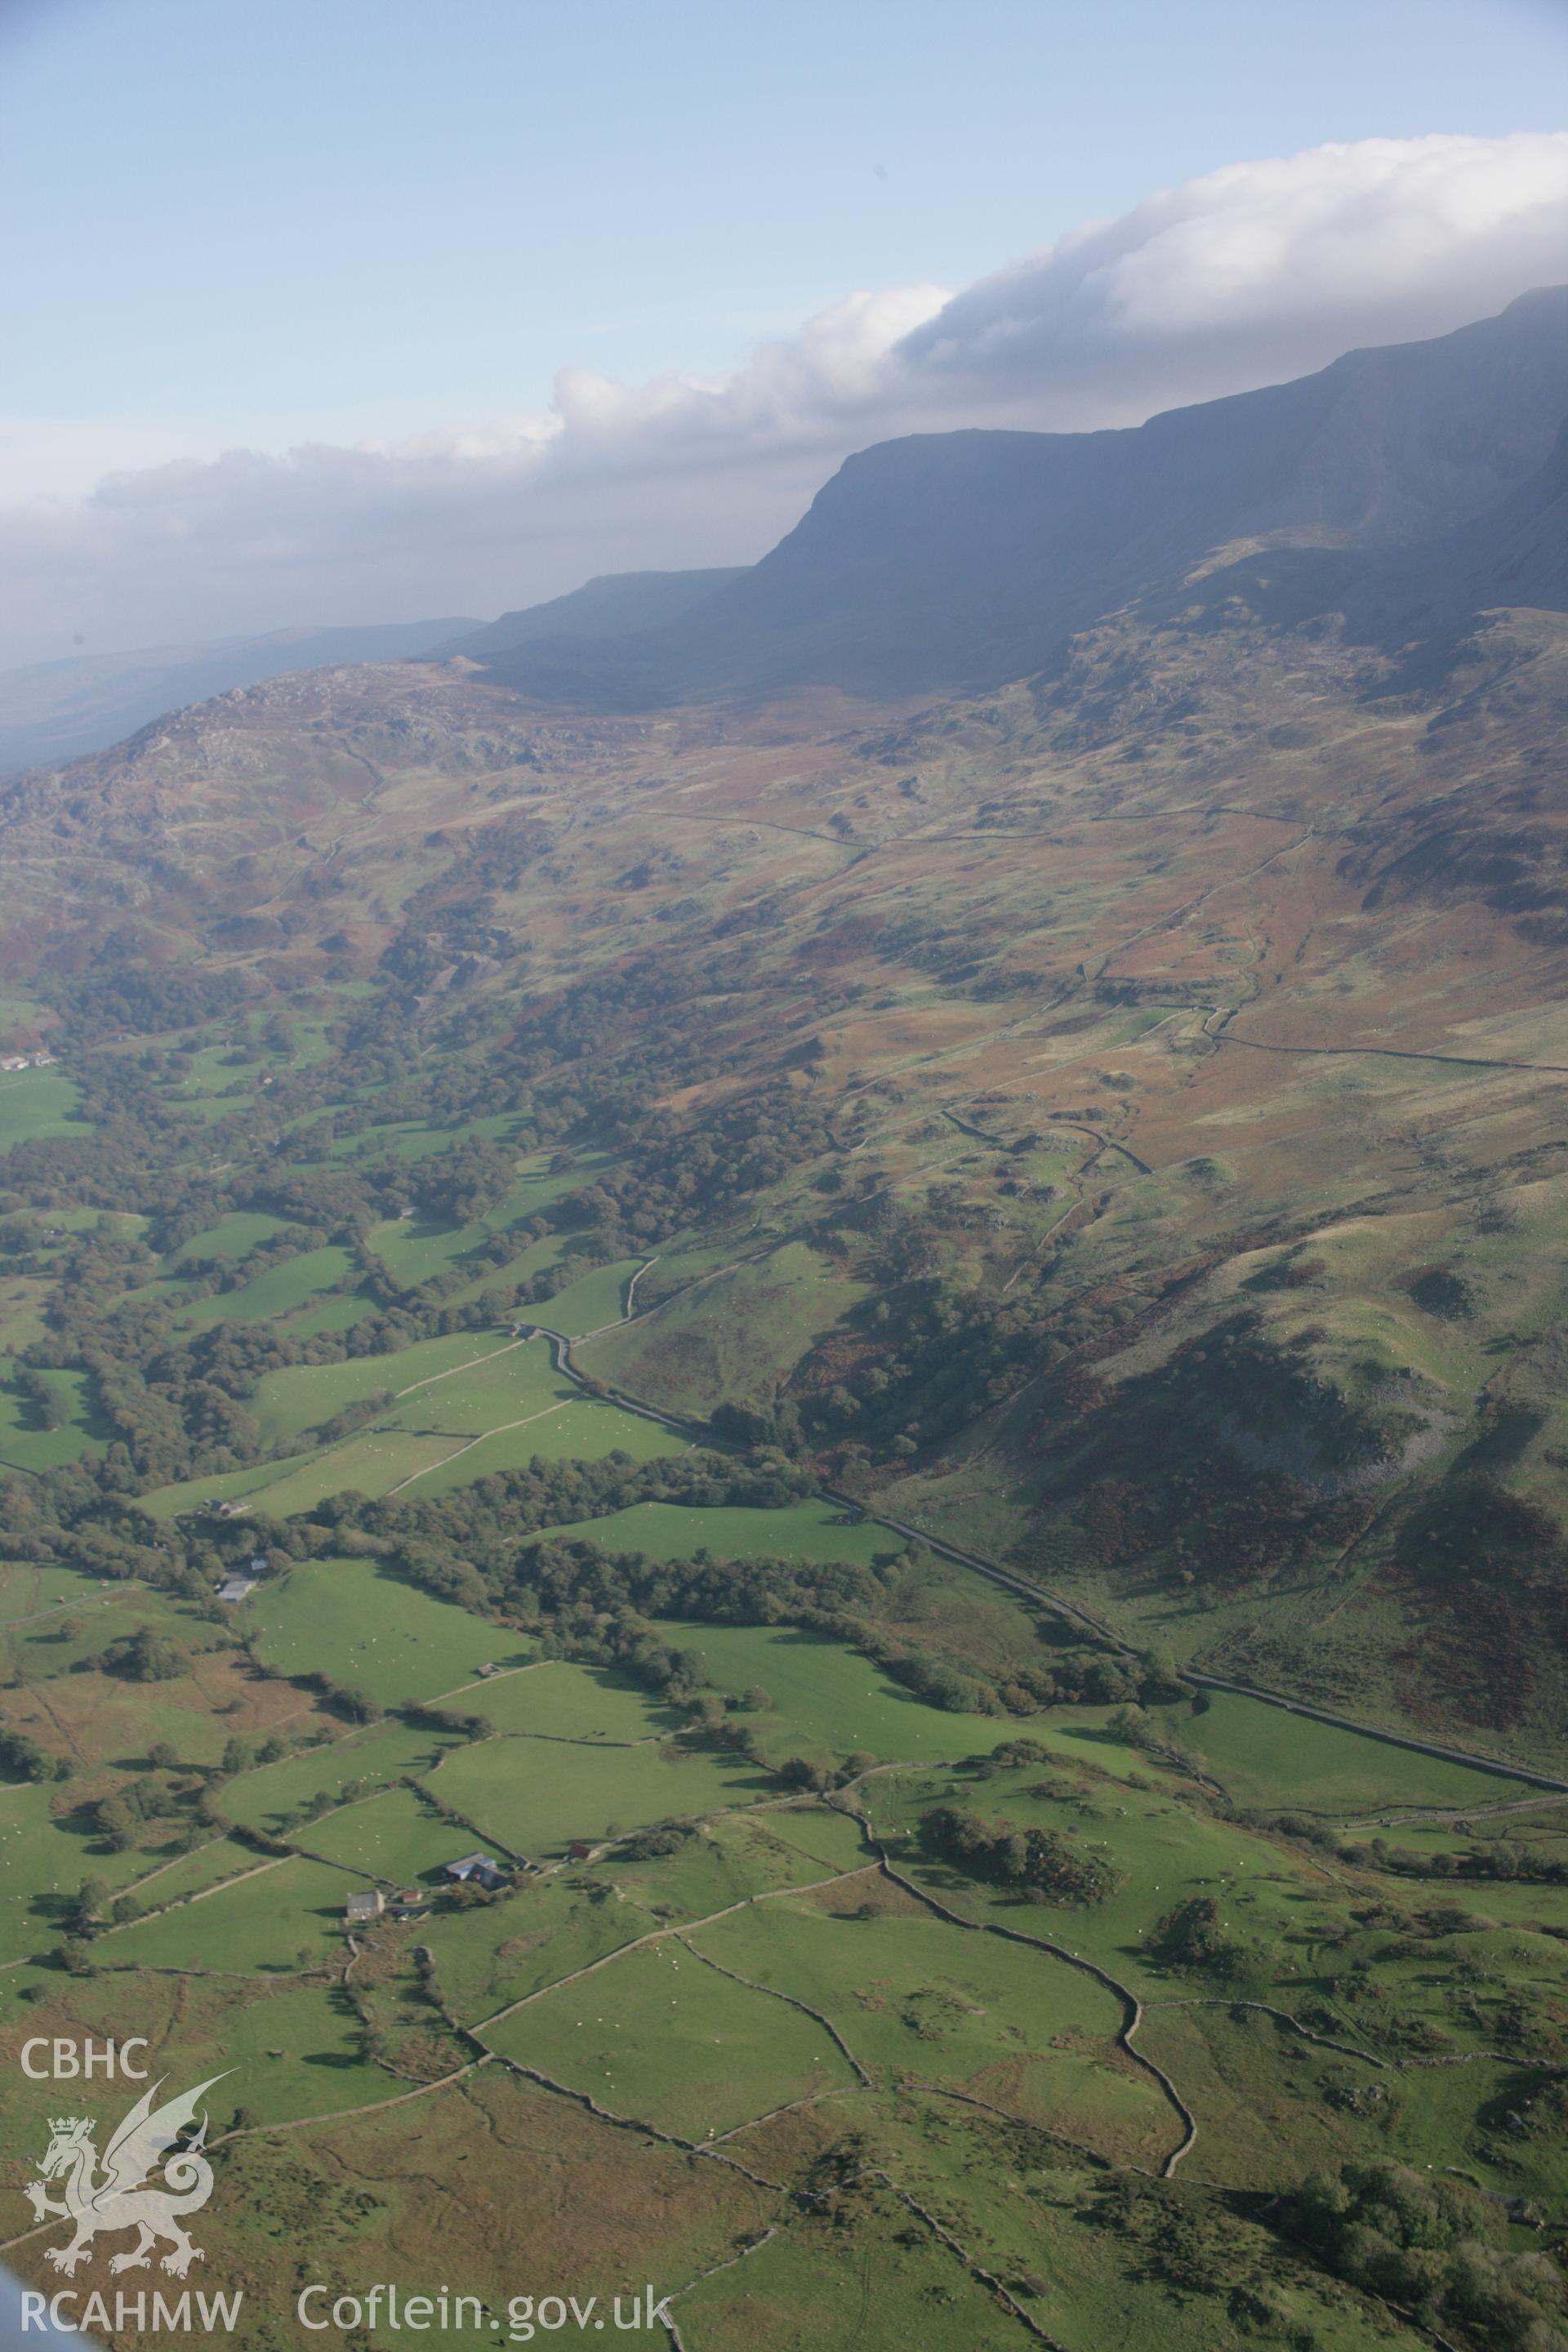 RCAHMW colour oblique aerial photograph of the landscape near Islawr-dref with Cadair Idris beyond. Taken on 17 October 2005 by Toby Driver